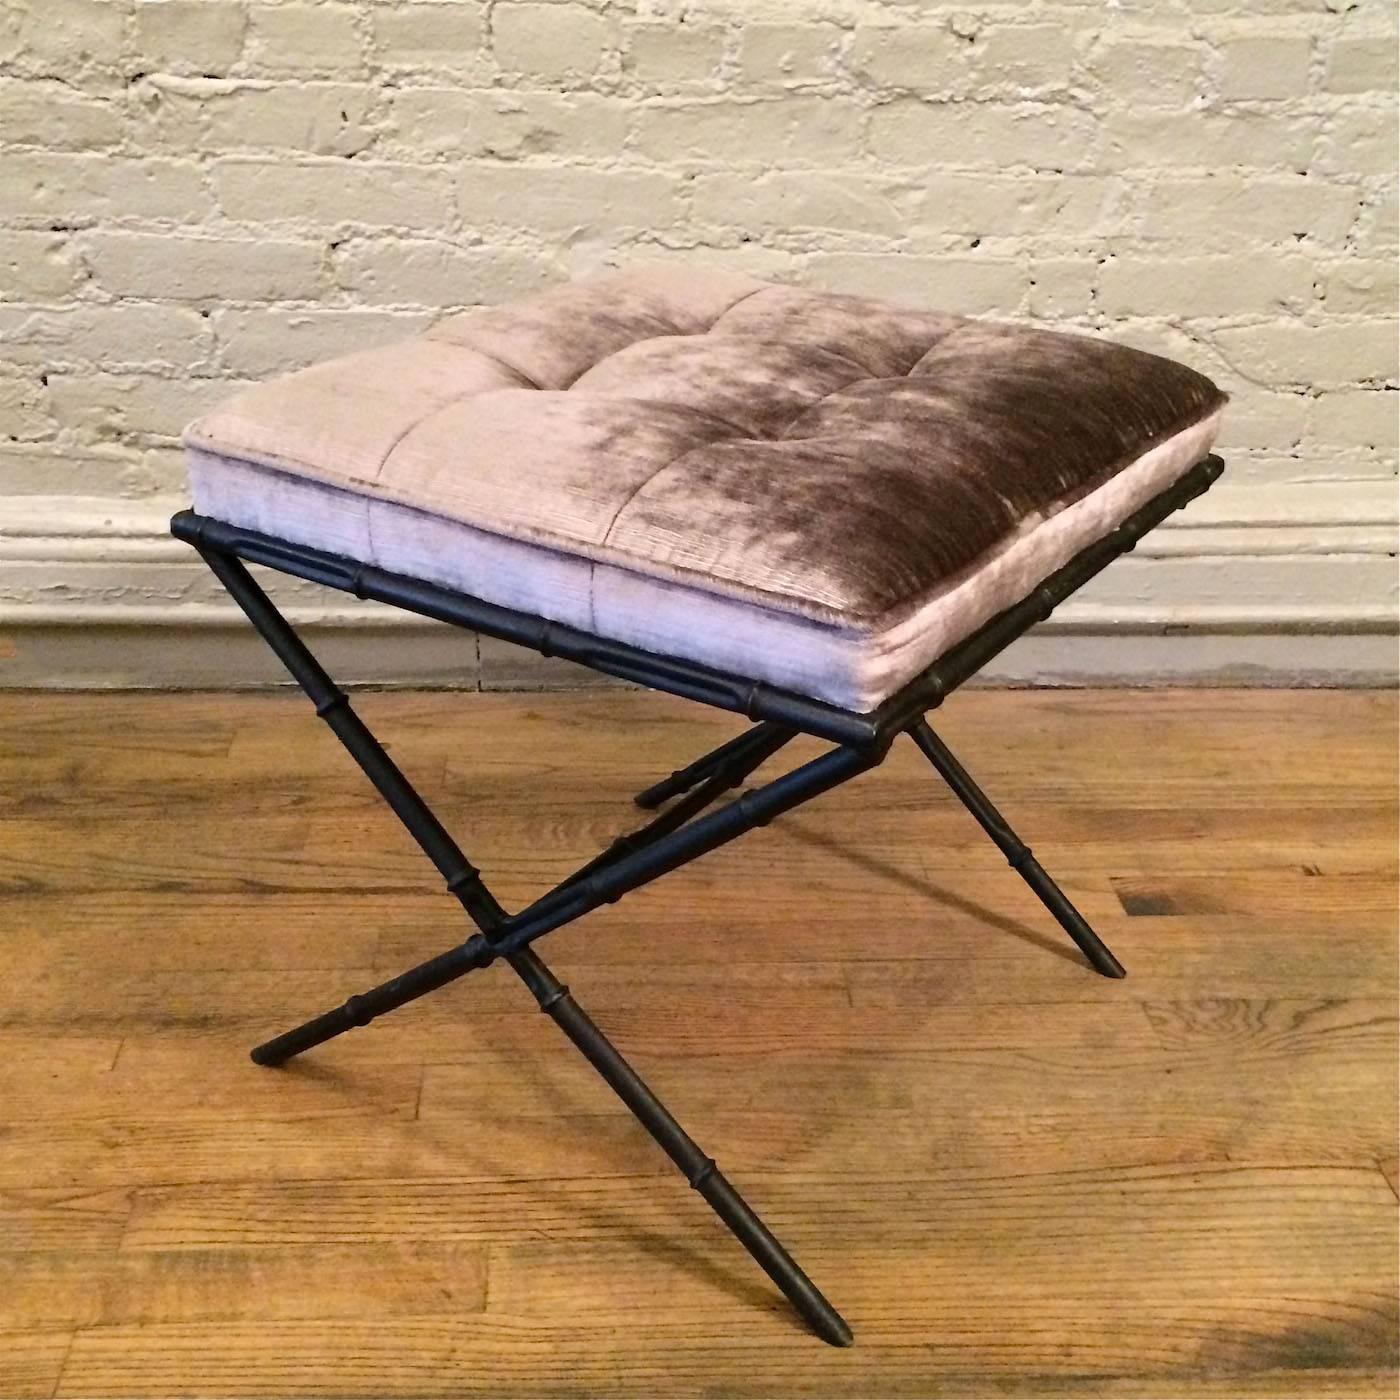 Hollywood Regency ottoman with bamboo motif, painted steel base is upholstered in a plush silver velvet.